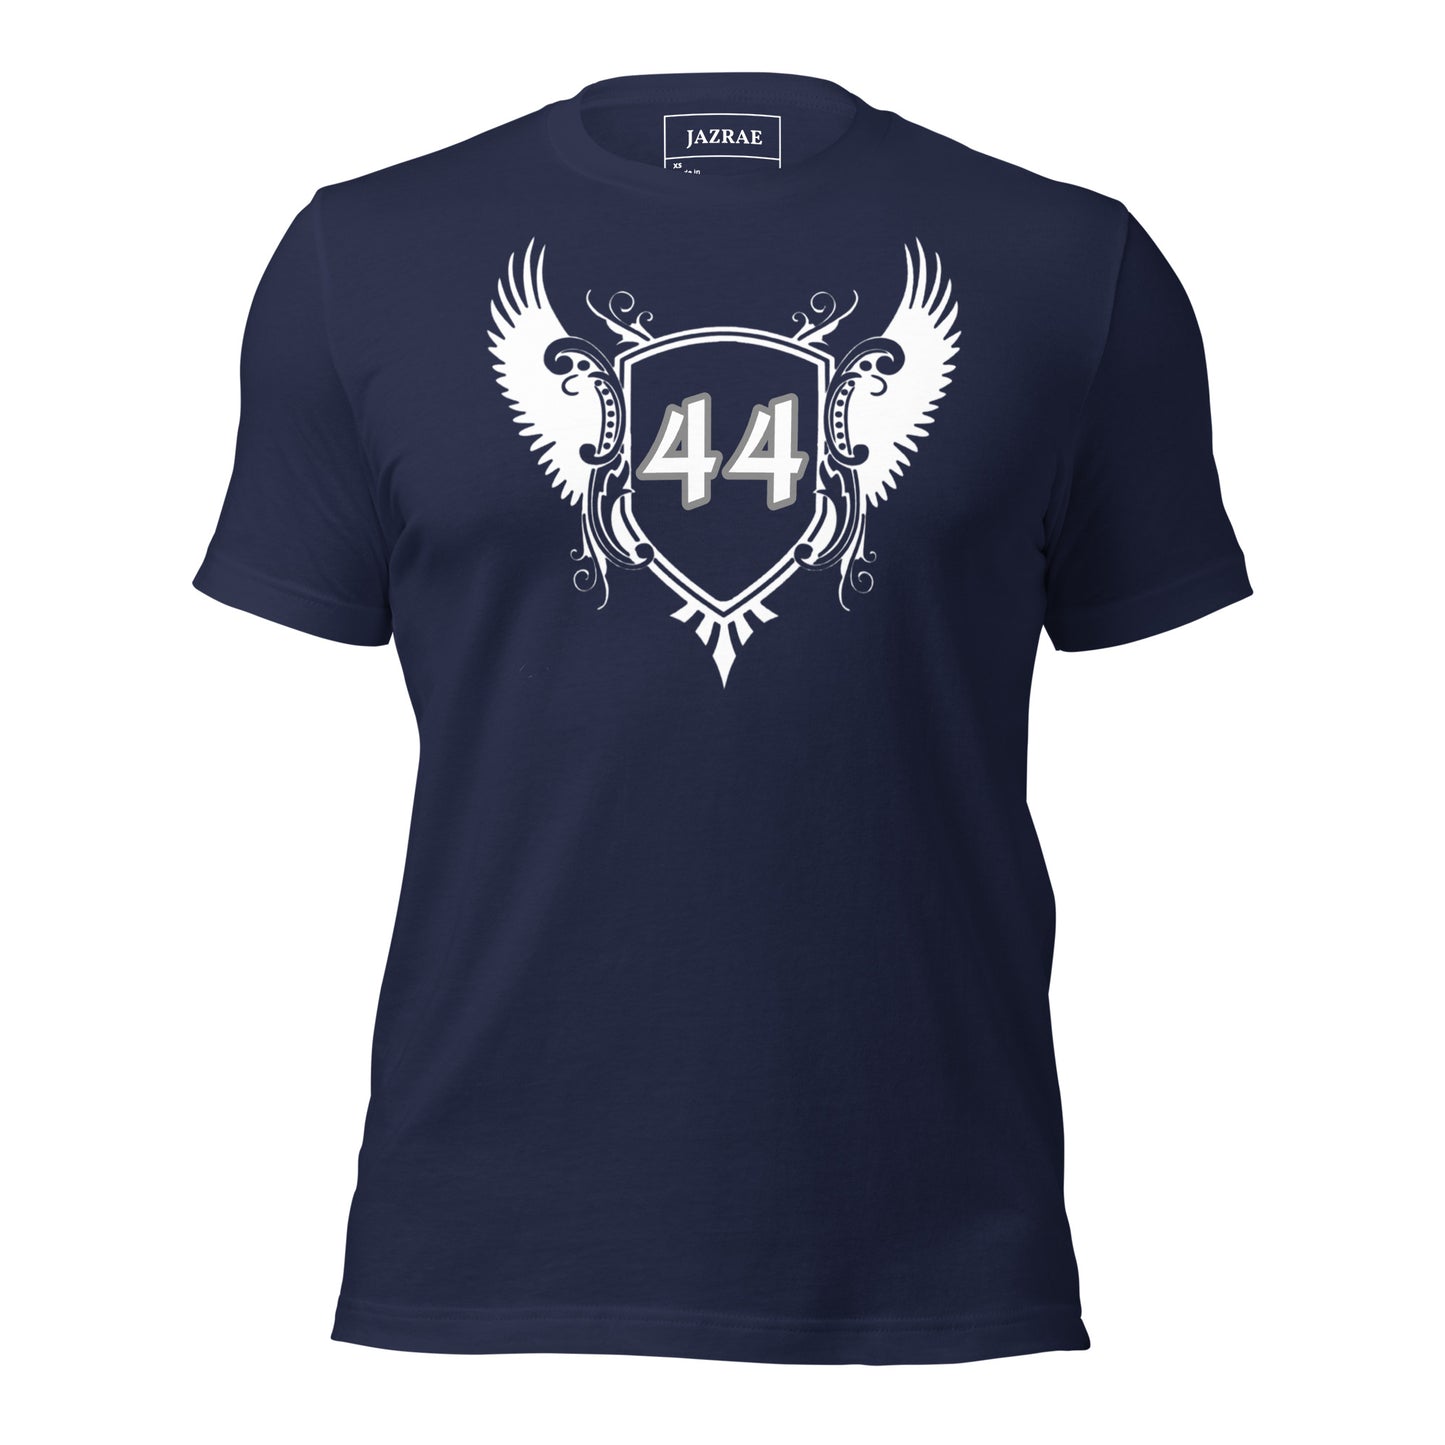 #44 Shield in multiple colors Unisex t-shirt